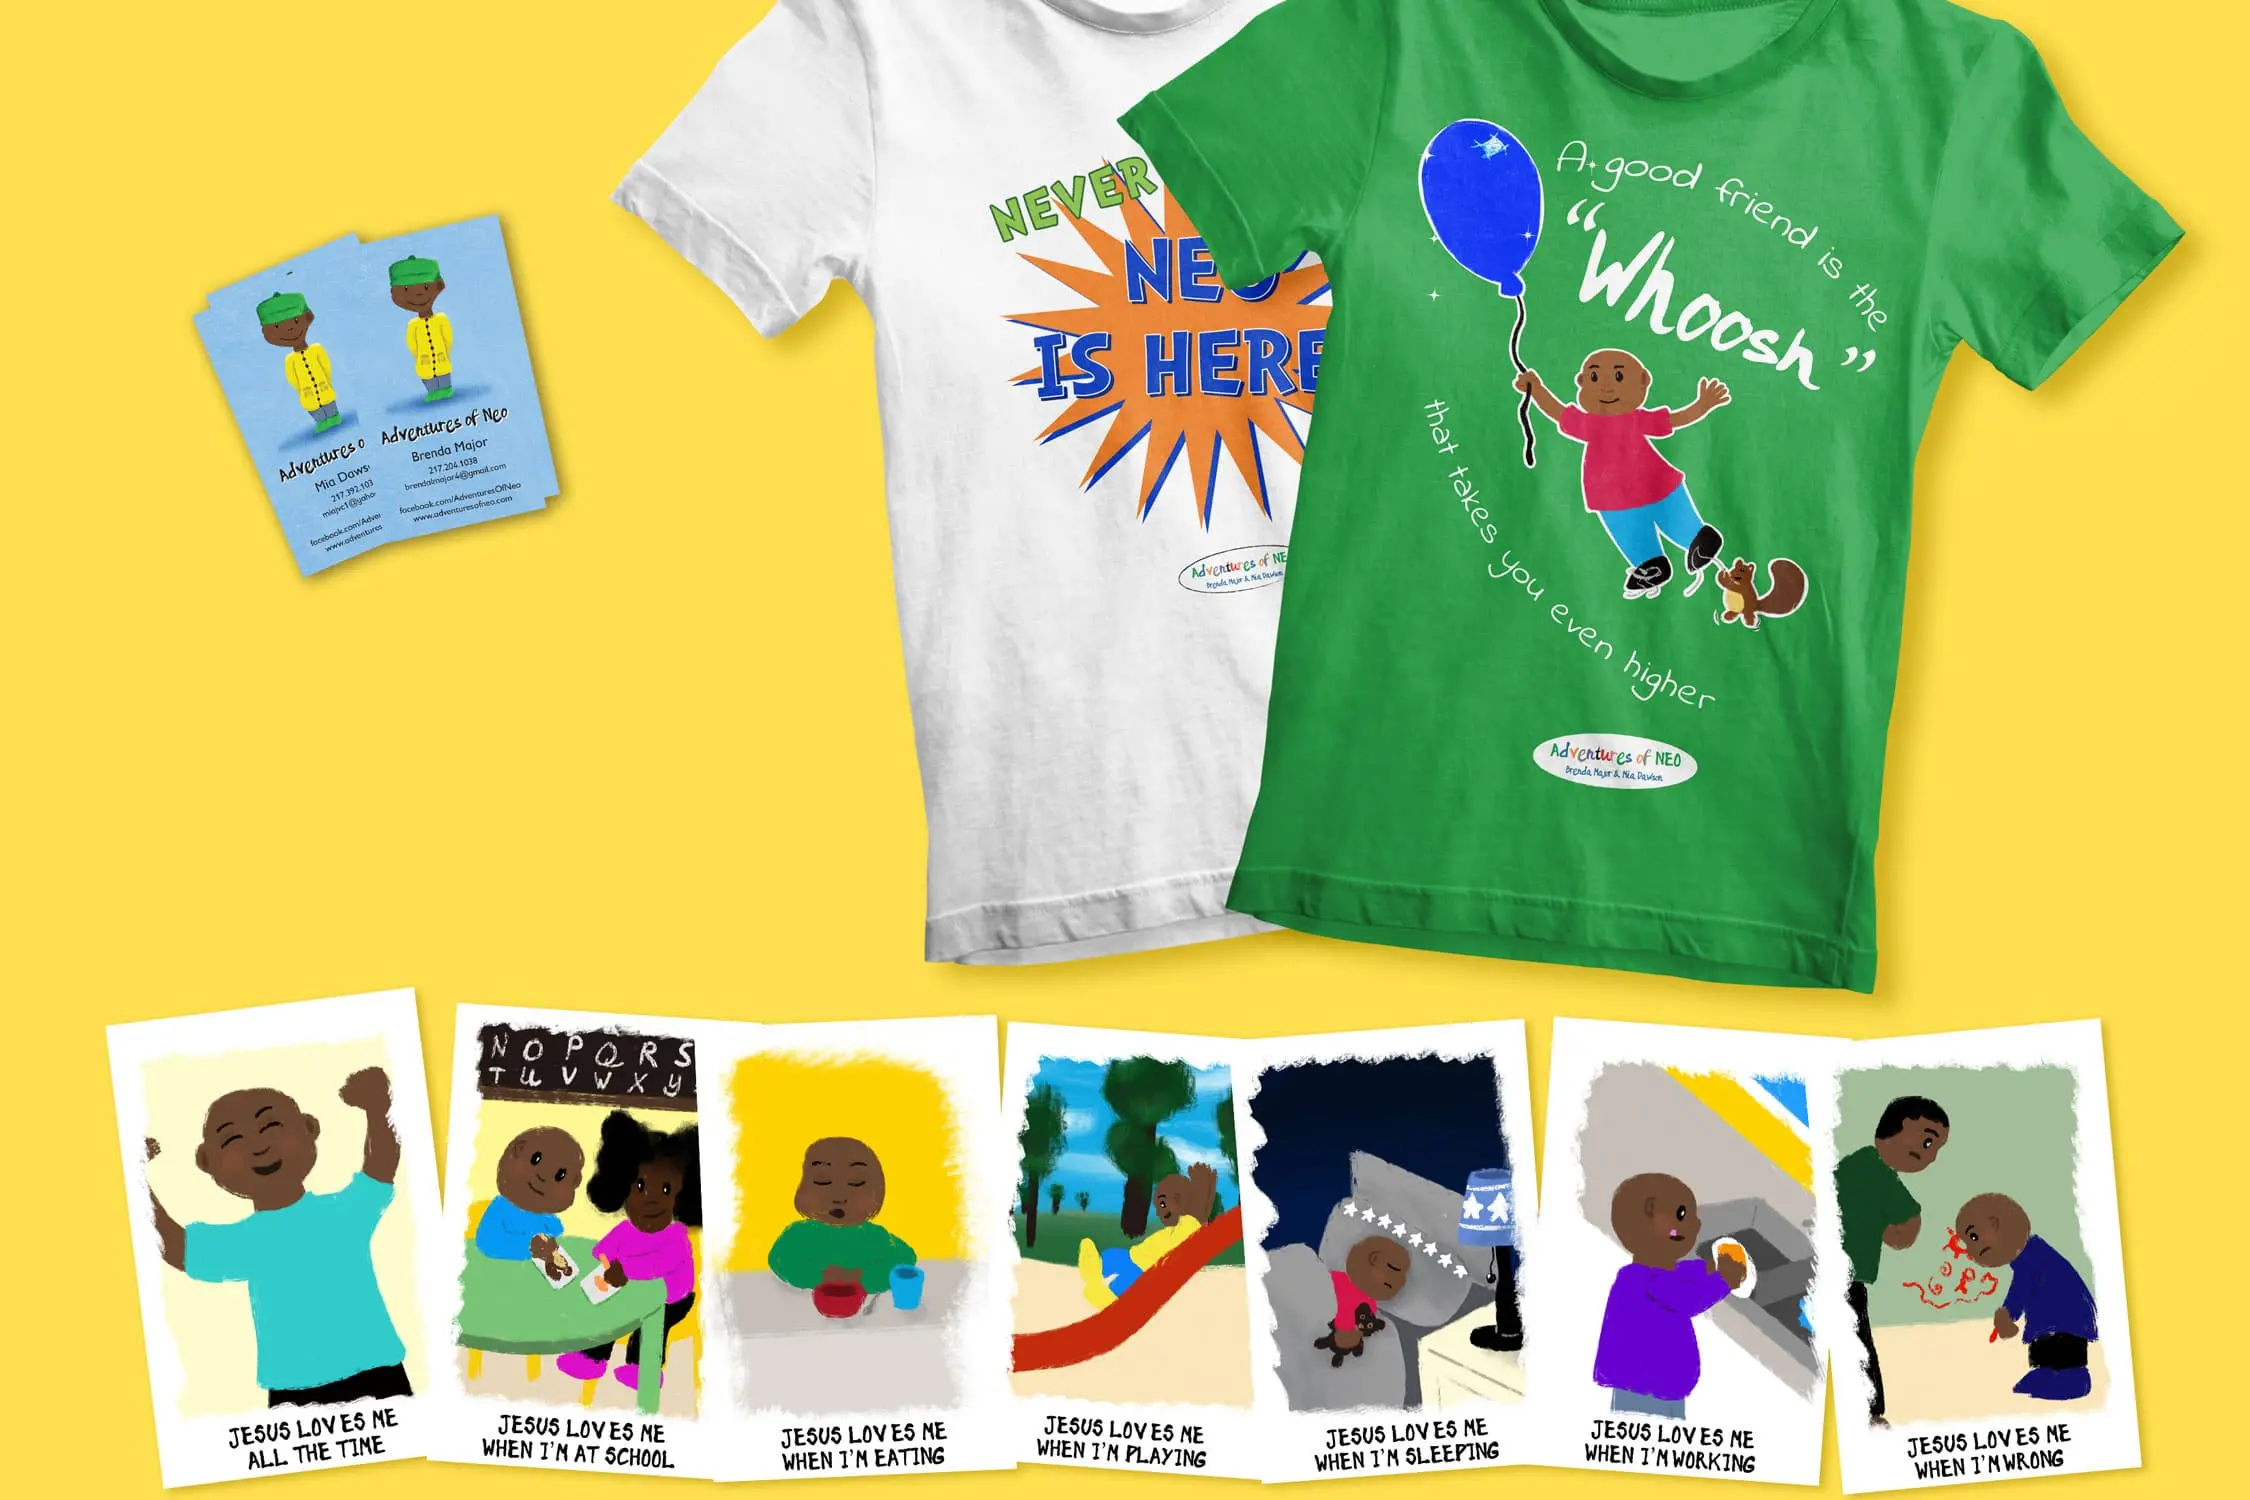 adventures of neo t-shirts, business cards, and postcards